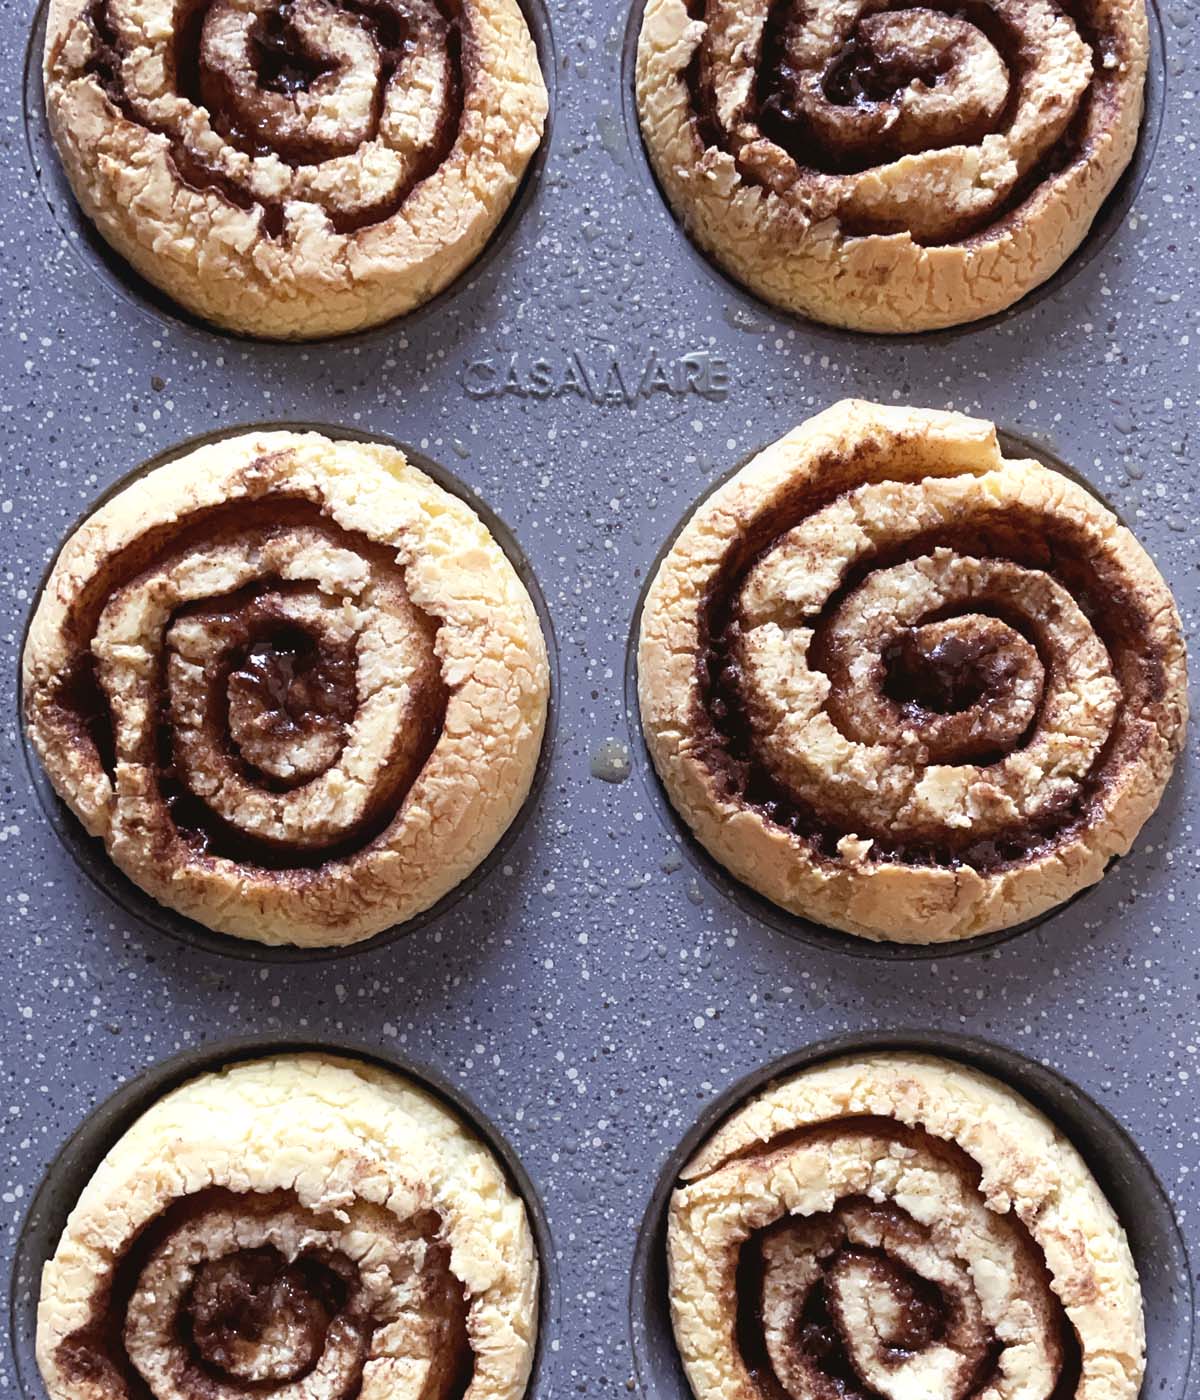 Brown crackled baked cinnamon rolls in a muffin tin.